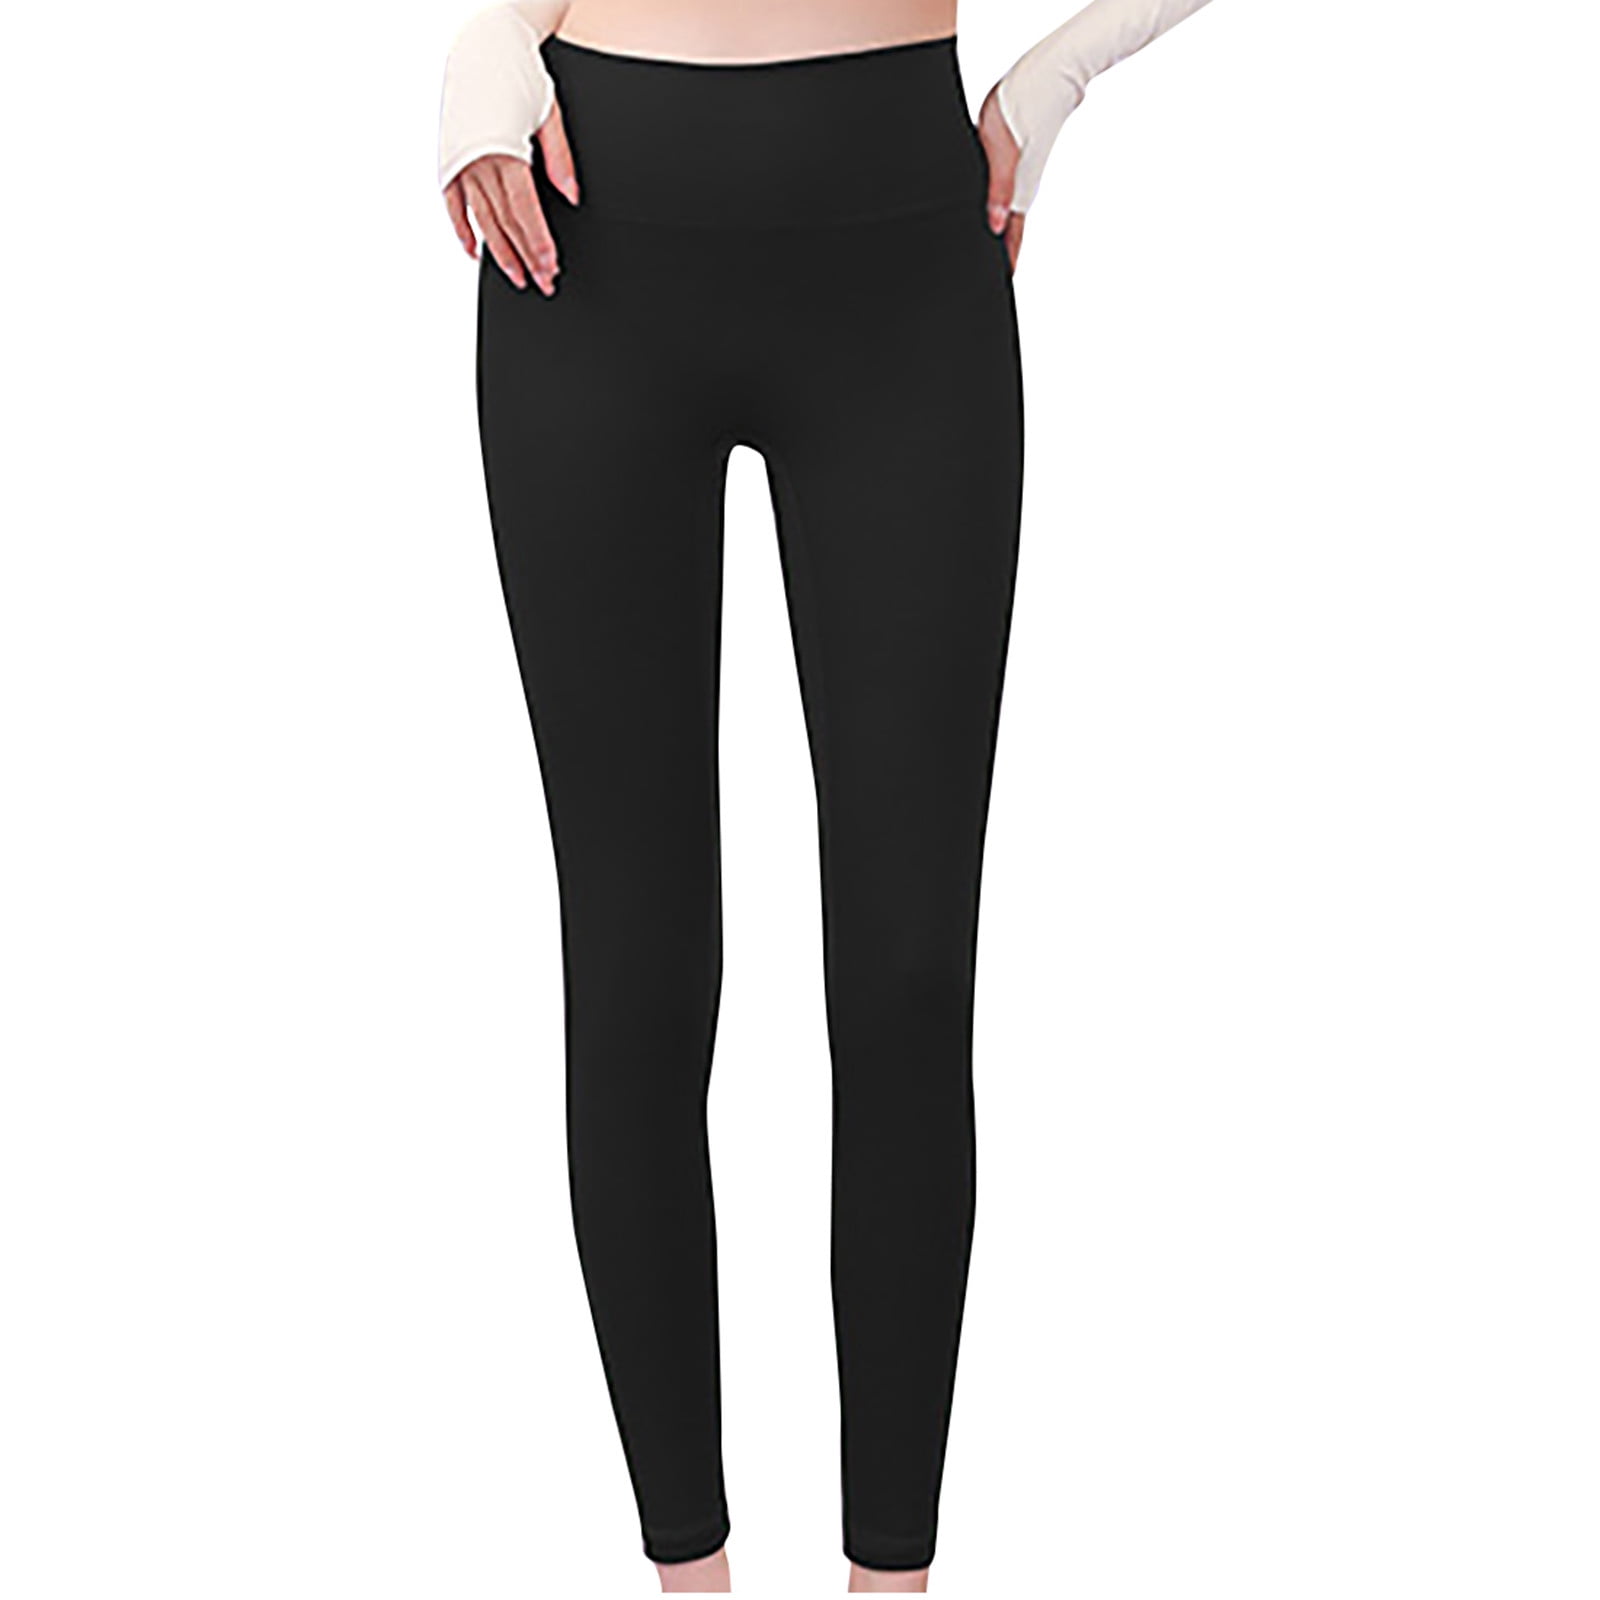 SELONE Plus Size Leggings for Women Workout Butt Lifting Gym